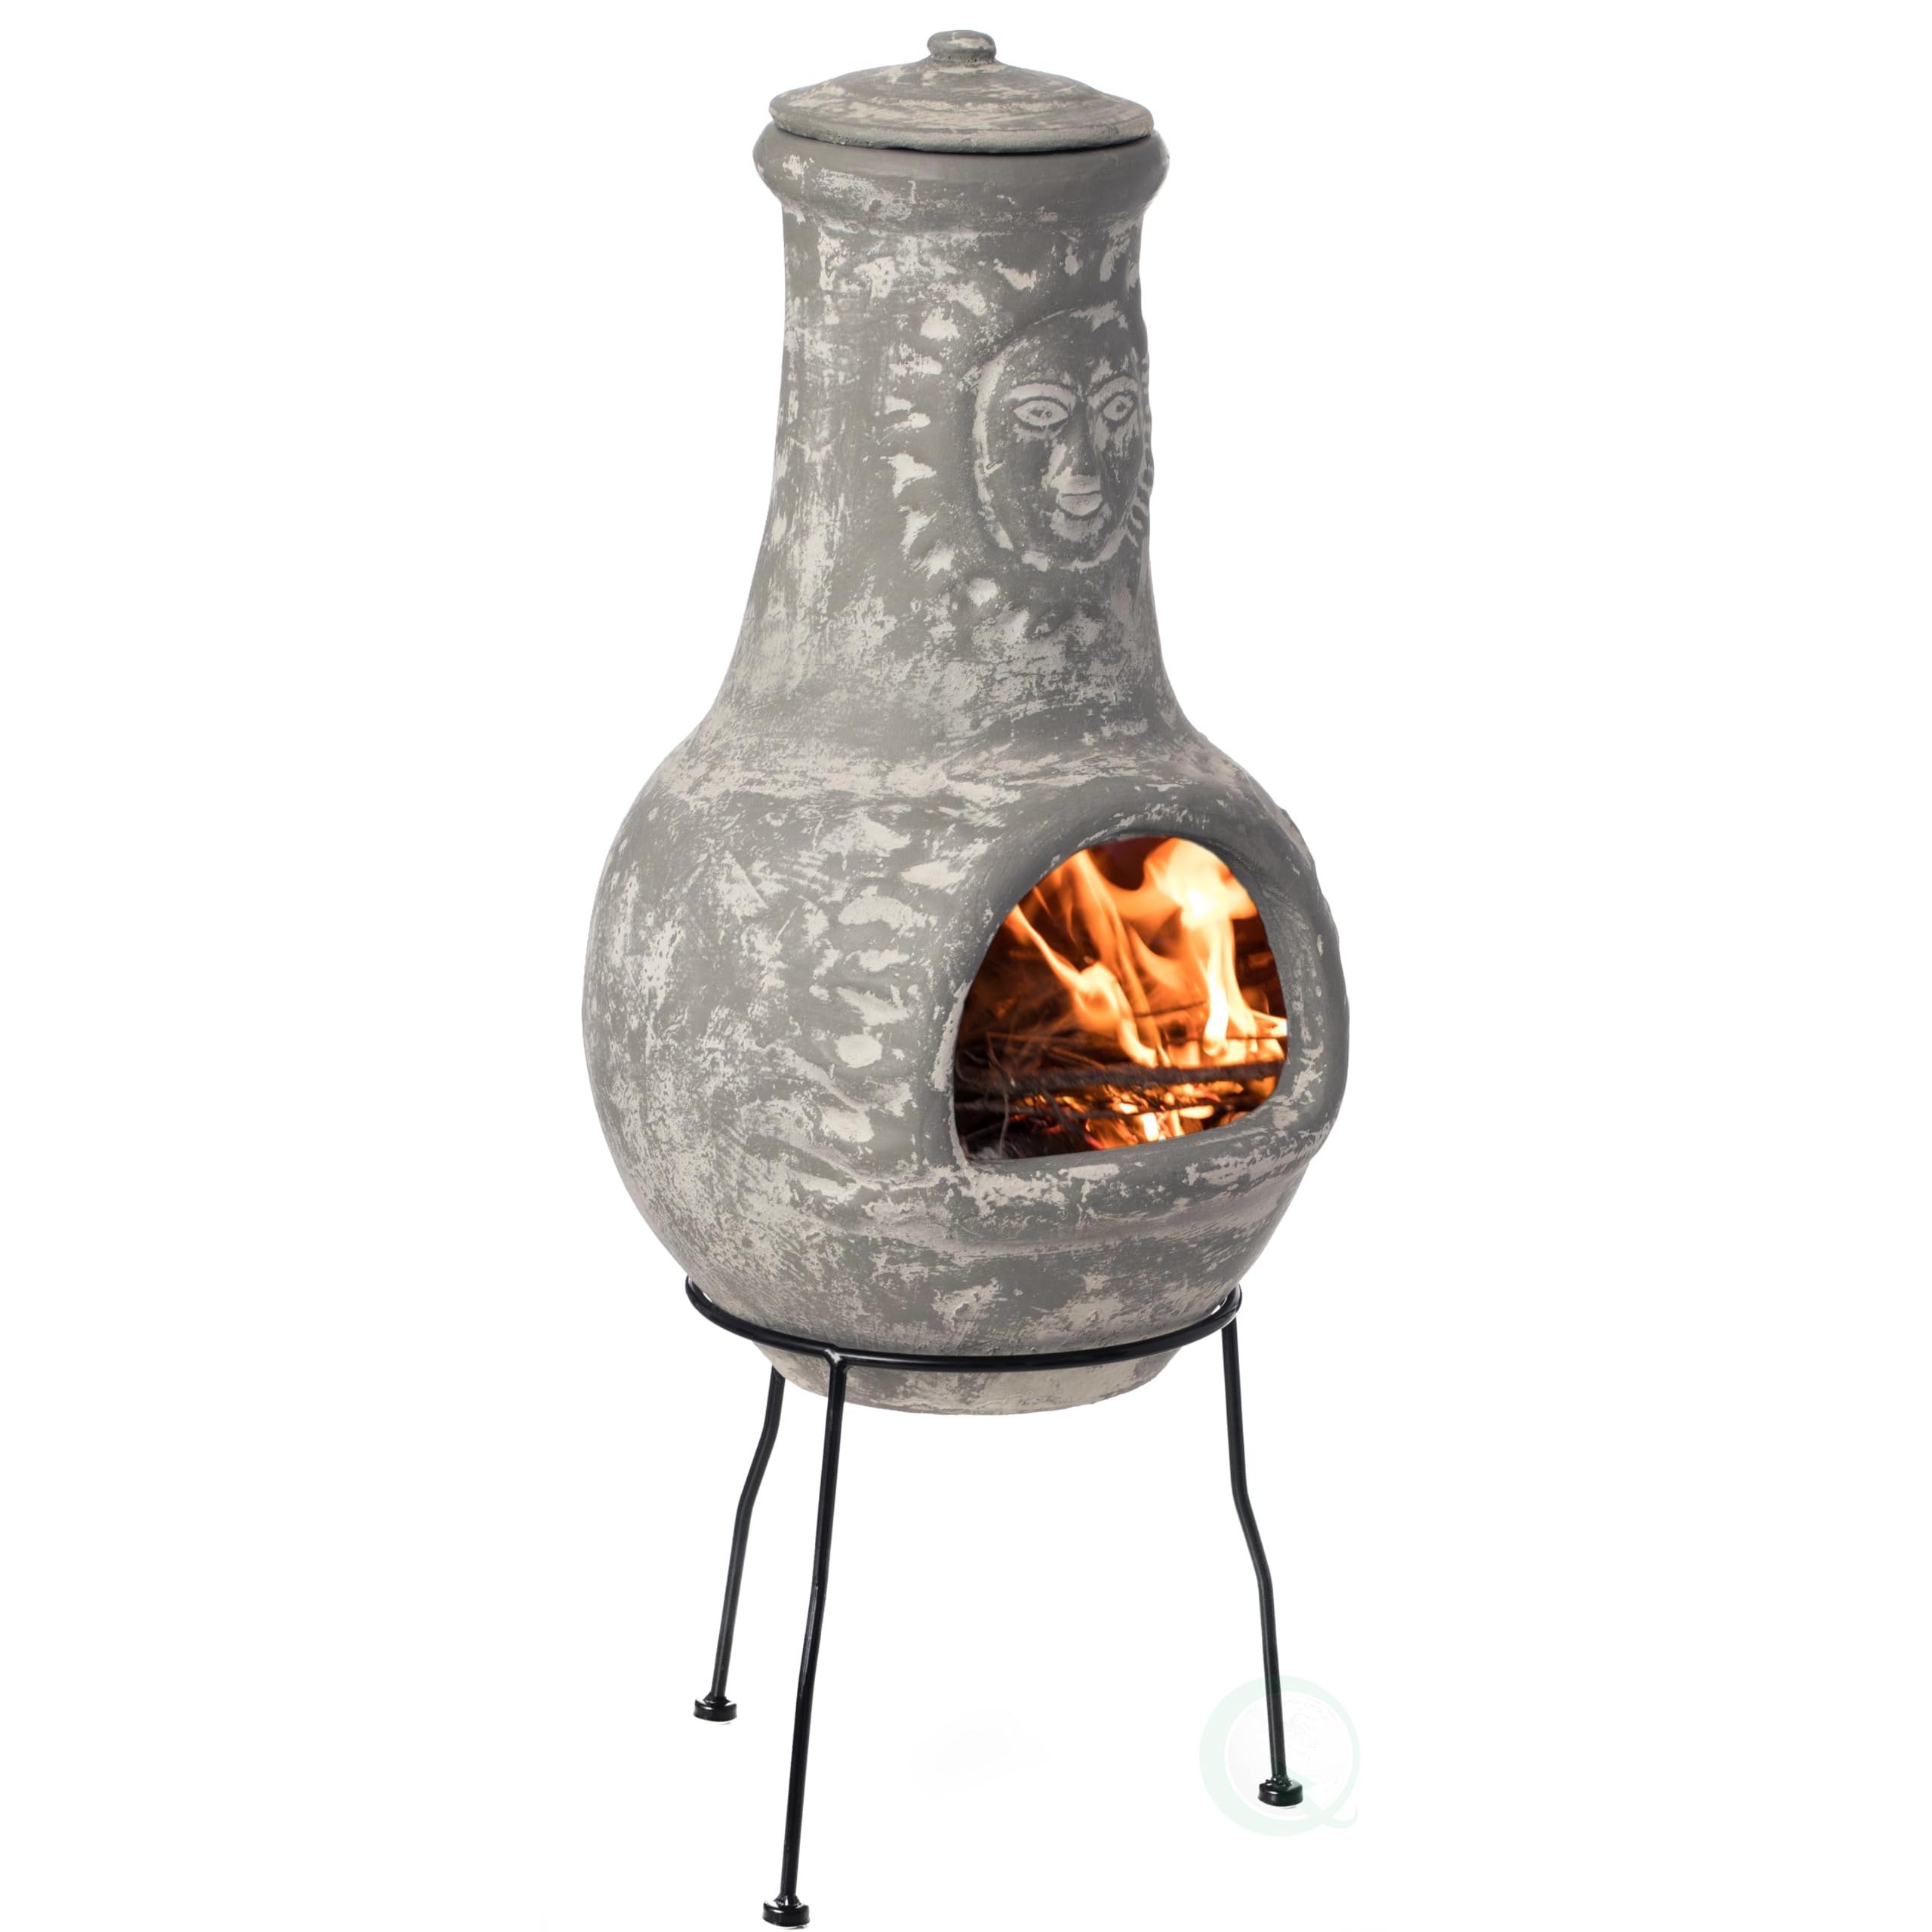 Fire Pit Or Chiminea: Which Is Better